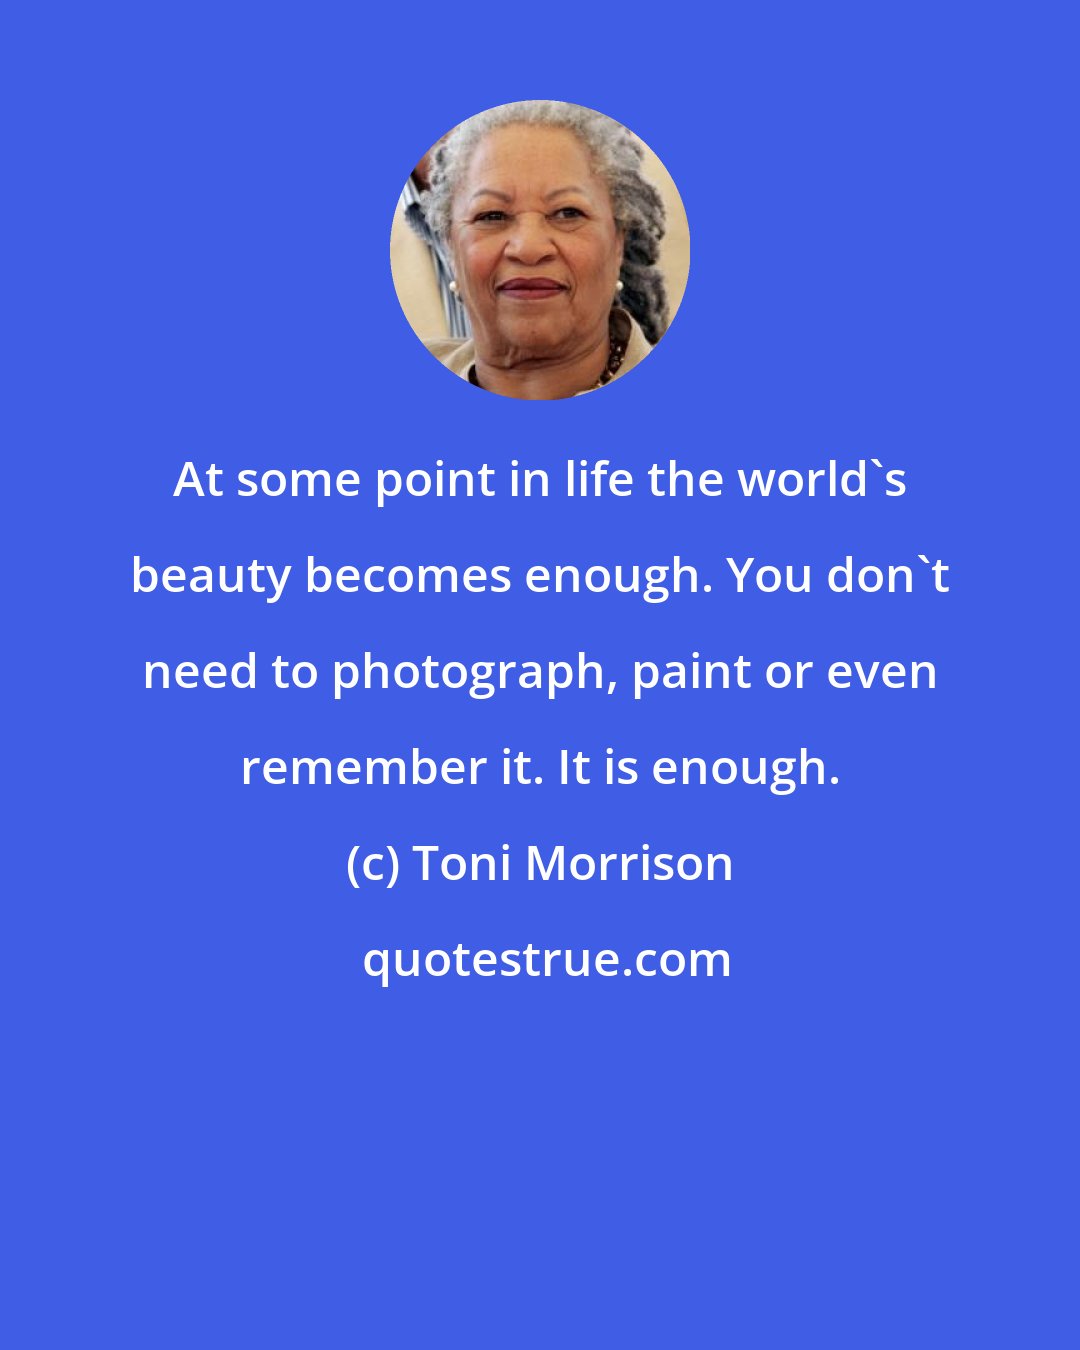 Toni Morrison: At some point in life the world's beauty becomes enough. You don't need to photograph, paint or even remember it. It is enough.